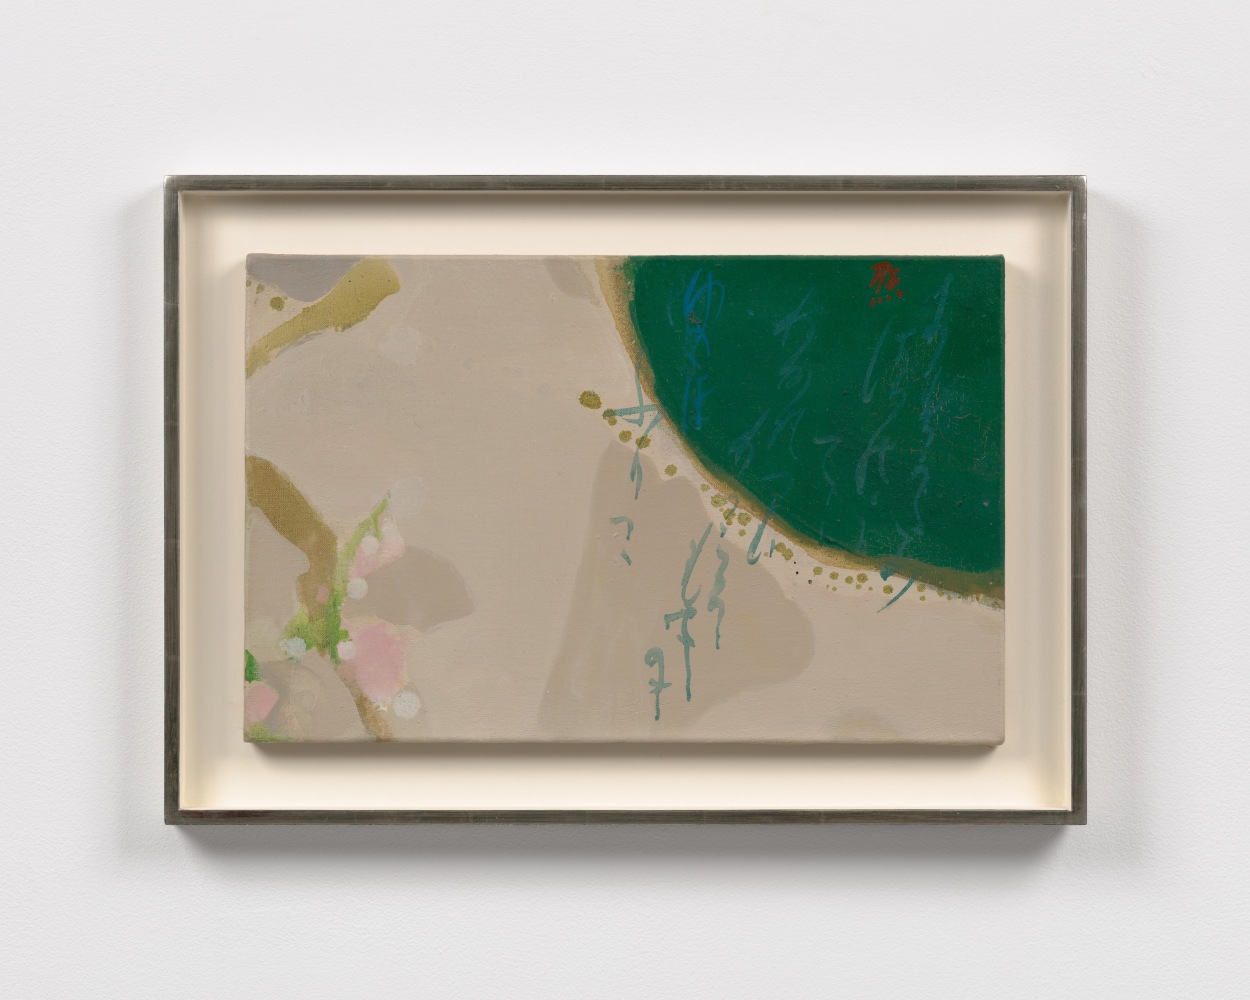 Beige and turquoise abstract painting by Teruko Yokoi